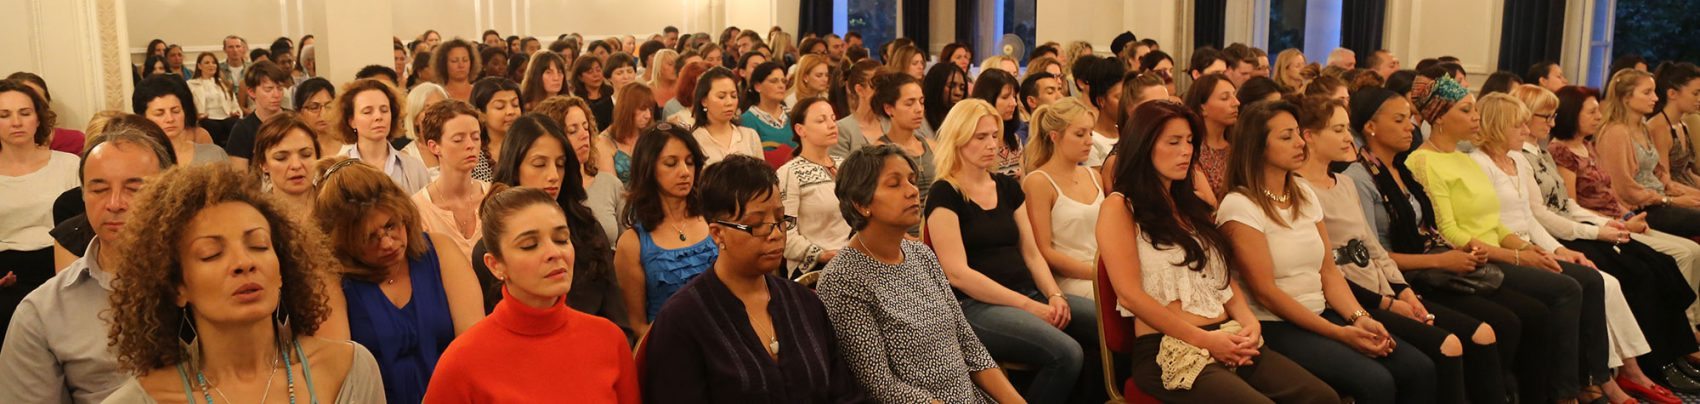 MeditationEvening Crowd - Theta Healing® Meditation Evening & Energy Clearing Session - Heal Your Life